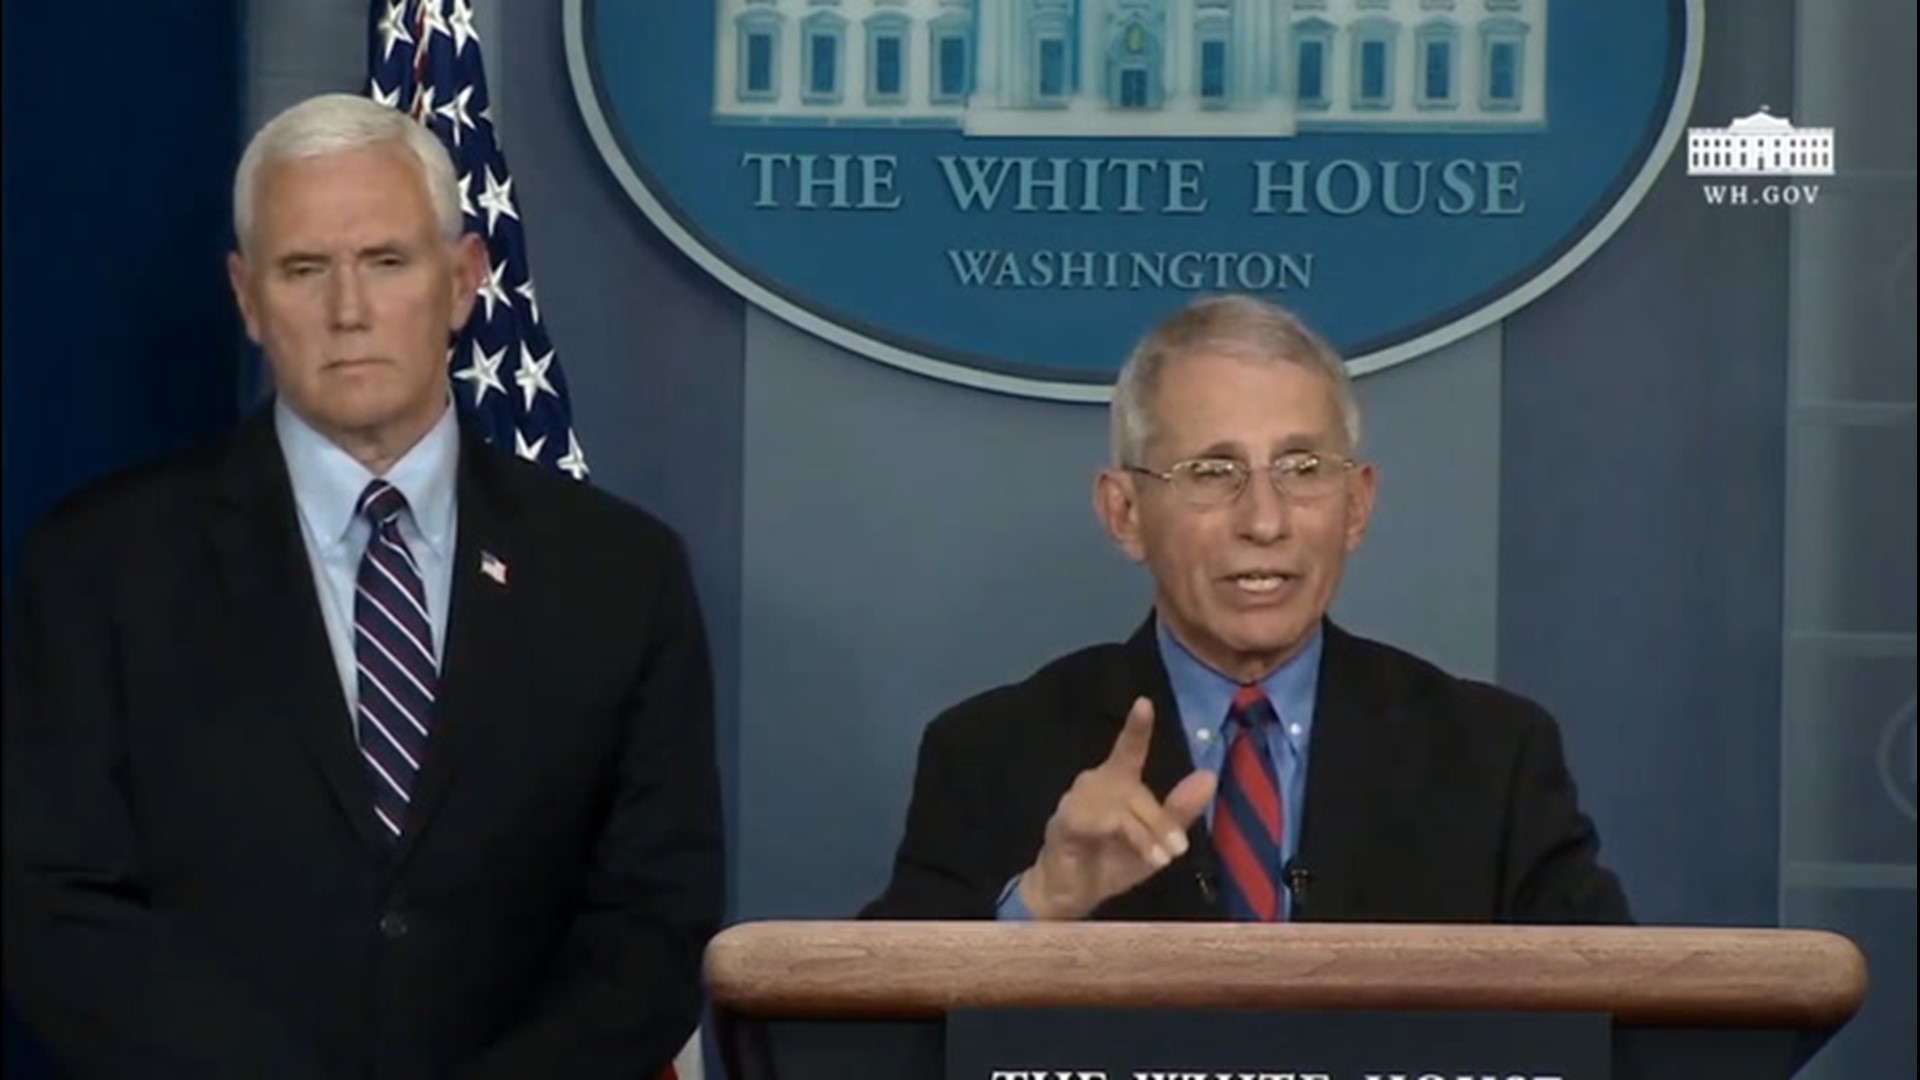 At a White House press conference on March 25, Anthony Fauci, director of the NIAID, elaborated on a possible seasonal cycle of COVID-19.